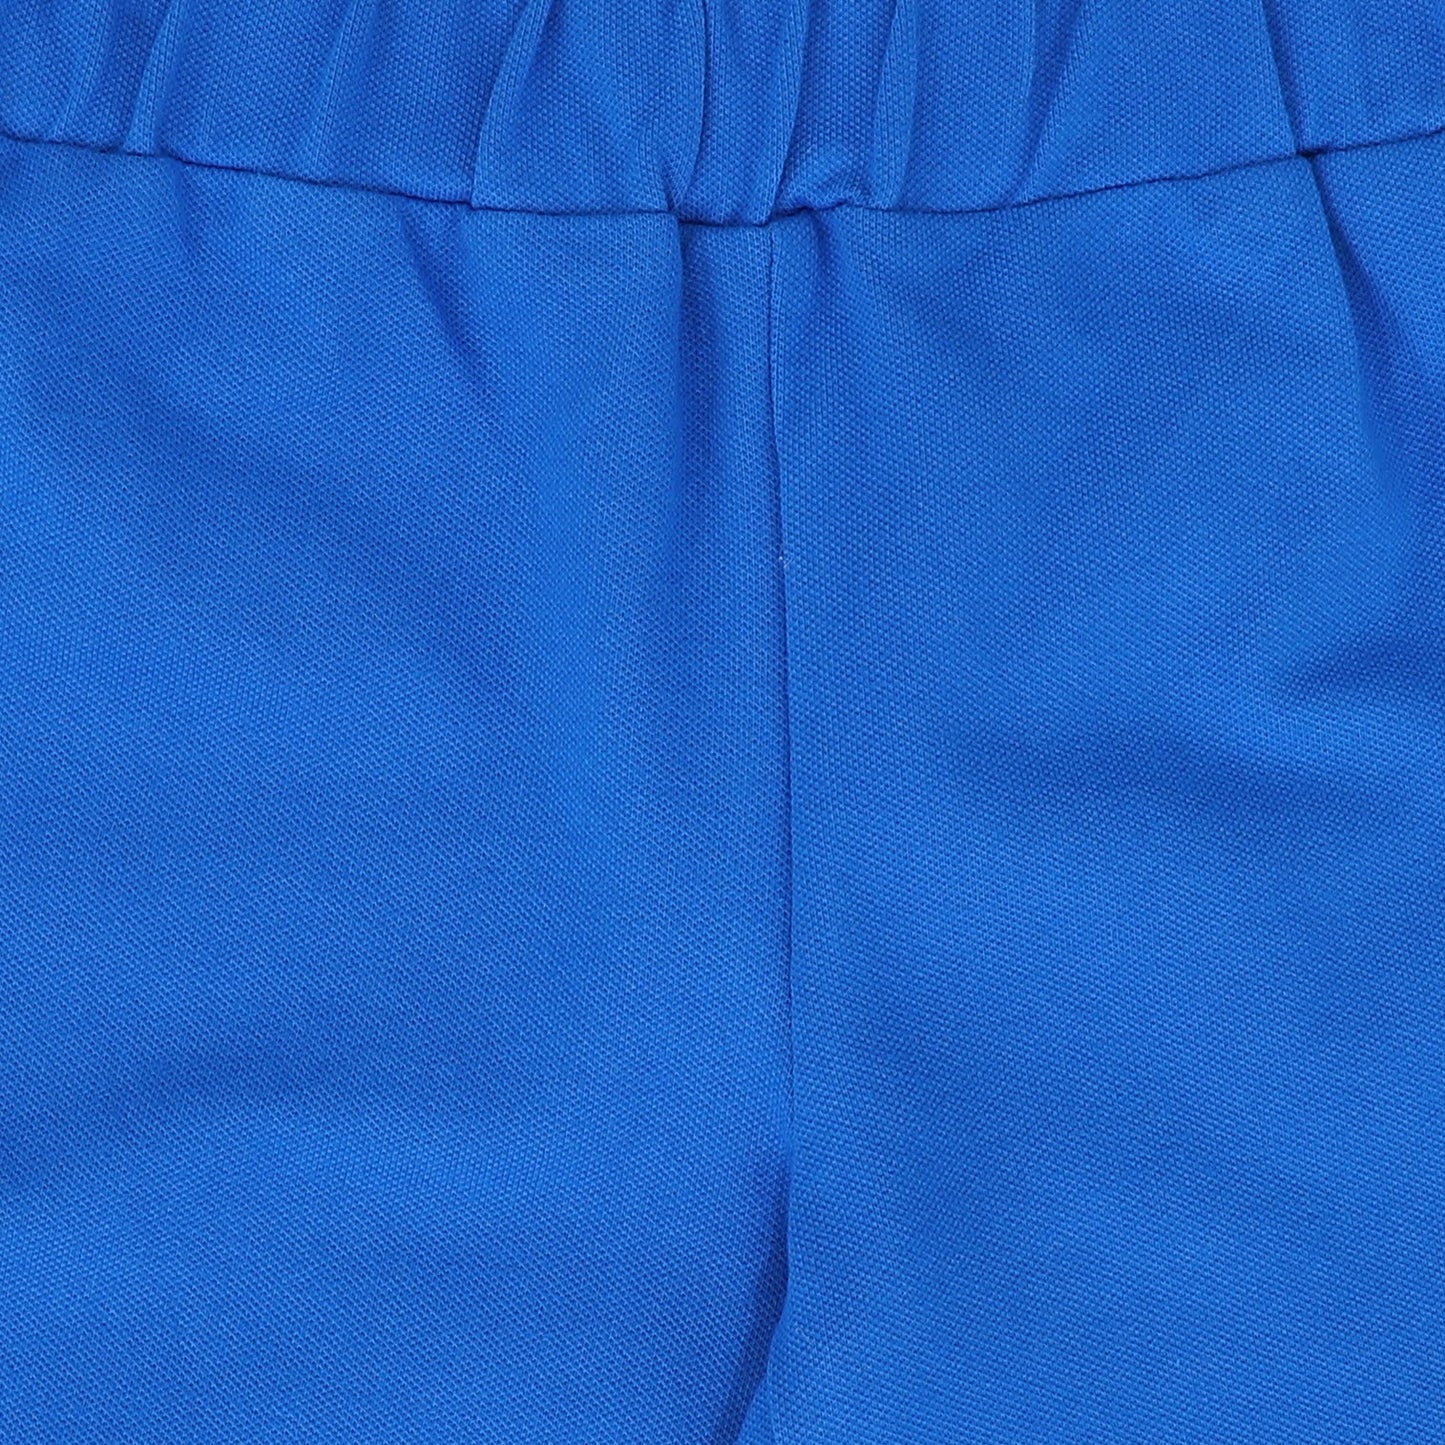 BACE COLLECTION BLUE PIQUE TRACK SHORTS